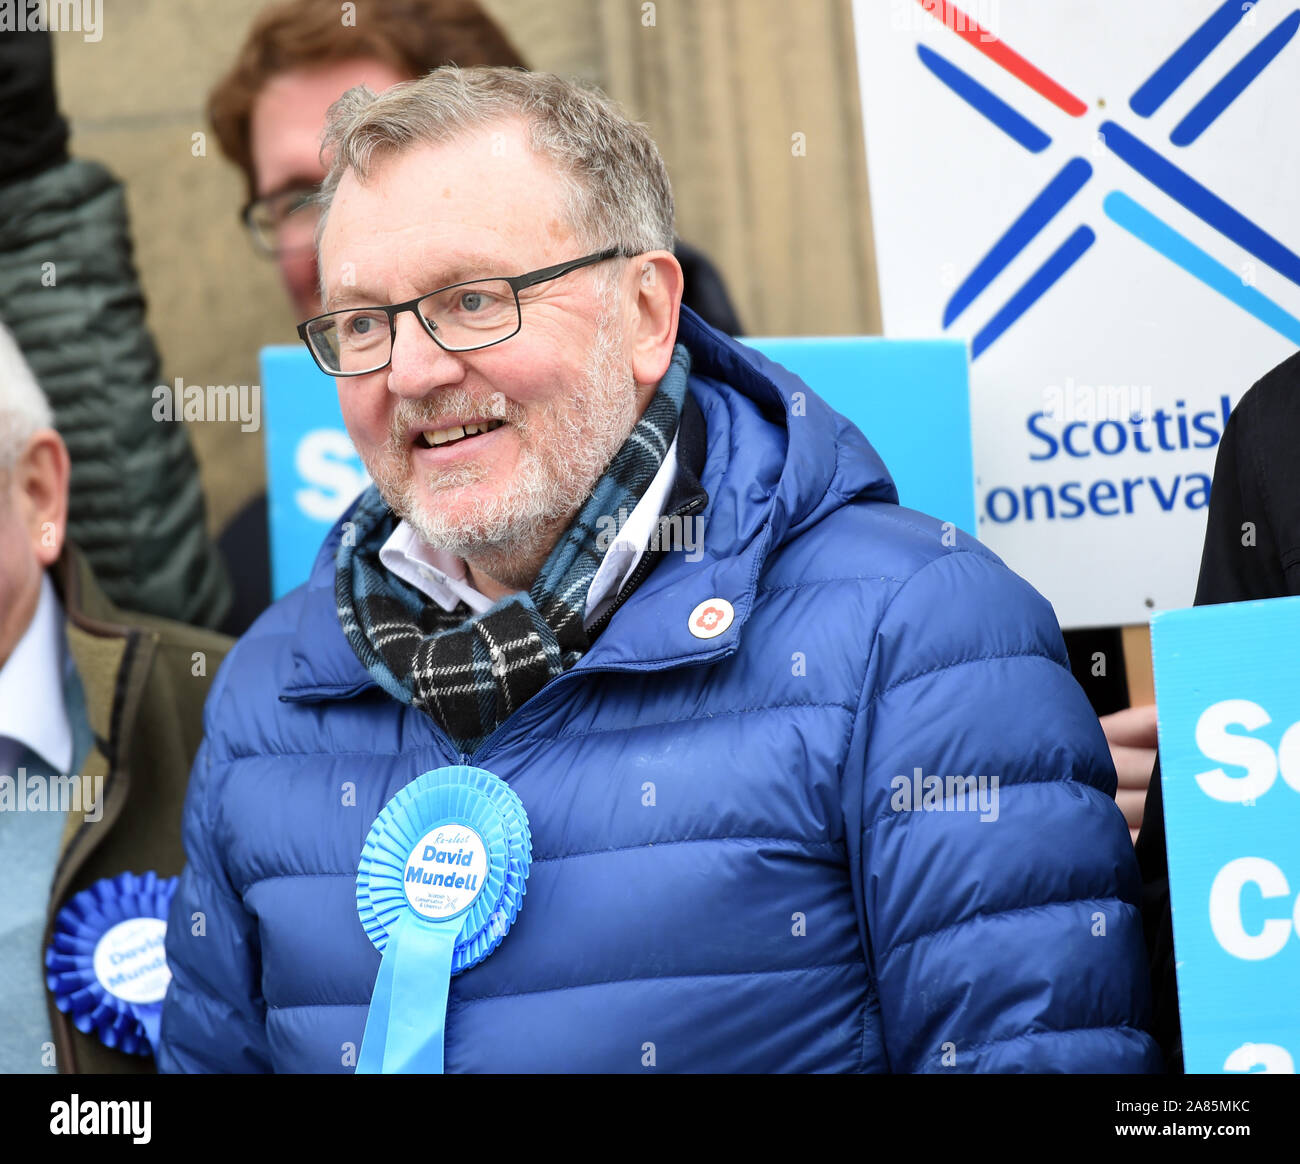 Peebles, Tweeddale, Scottish Borders.UK 6th Nov 19 . Setting out on the Election campaign   local Tory MP David Mundell (Dumfriesshire, Clydesdale and Tweeddale)  on Peebles High Street. Credit: eric mccowat/Alamy Live News Stock Photo